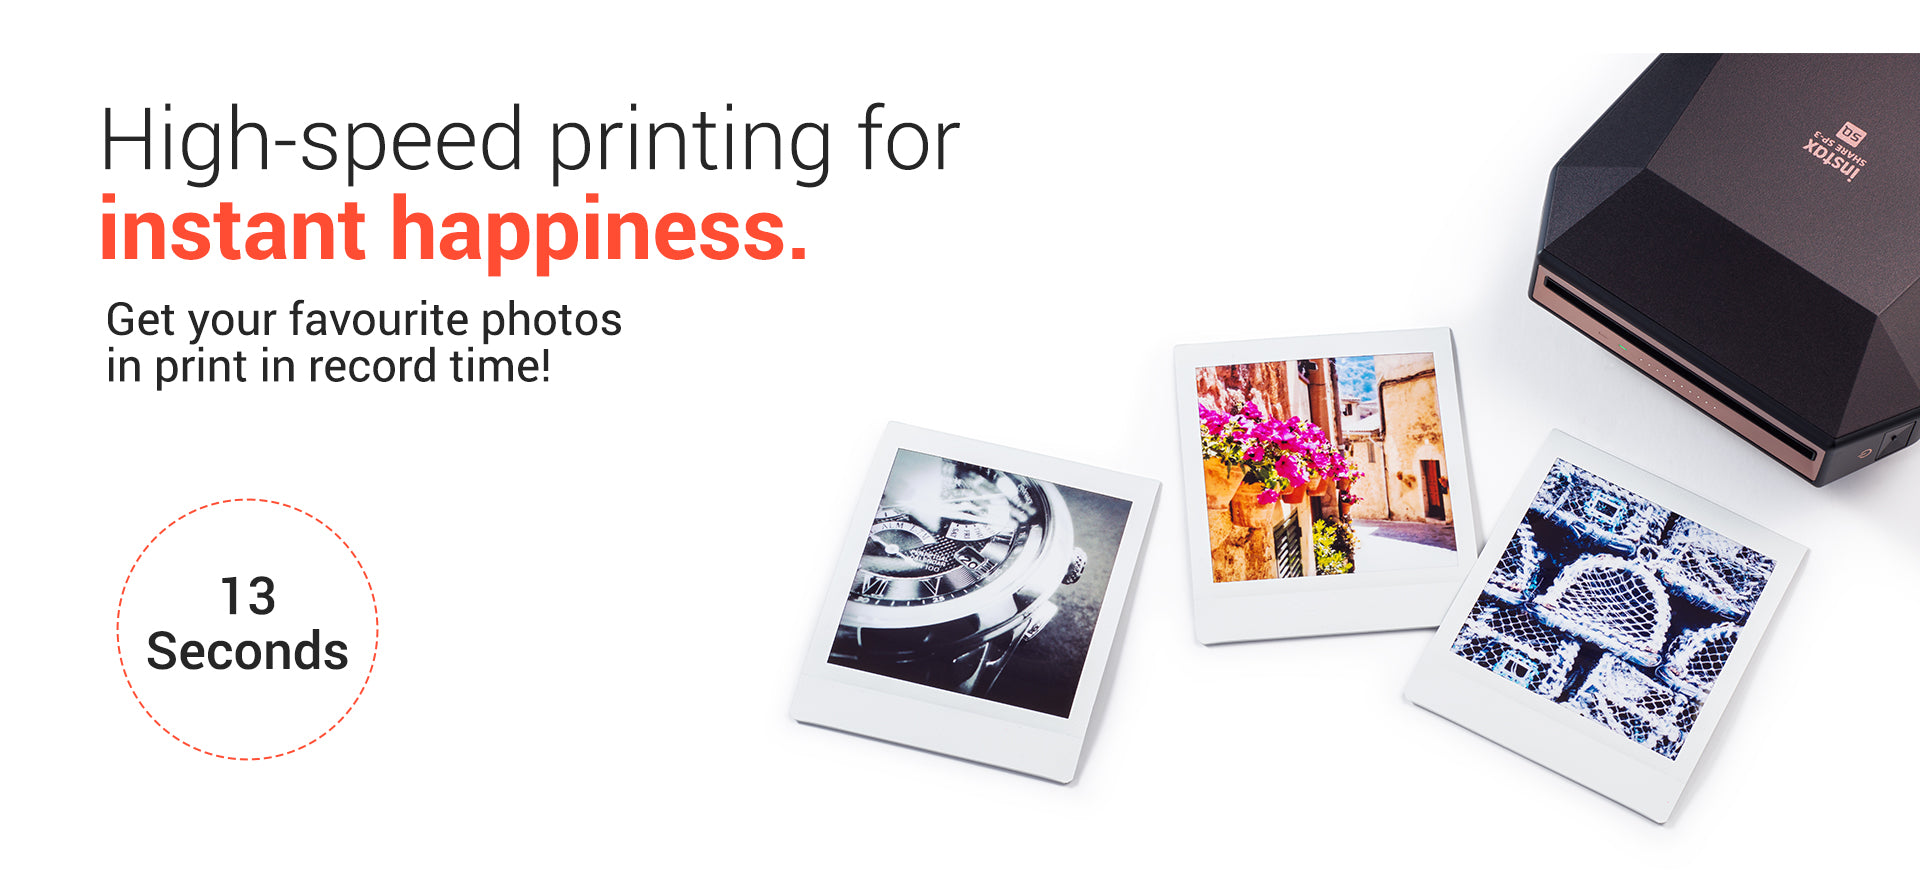 Instax Share SP3 Square Plus - Print Images in 13 seconds